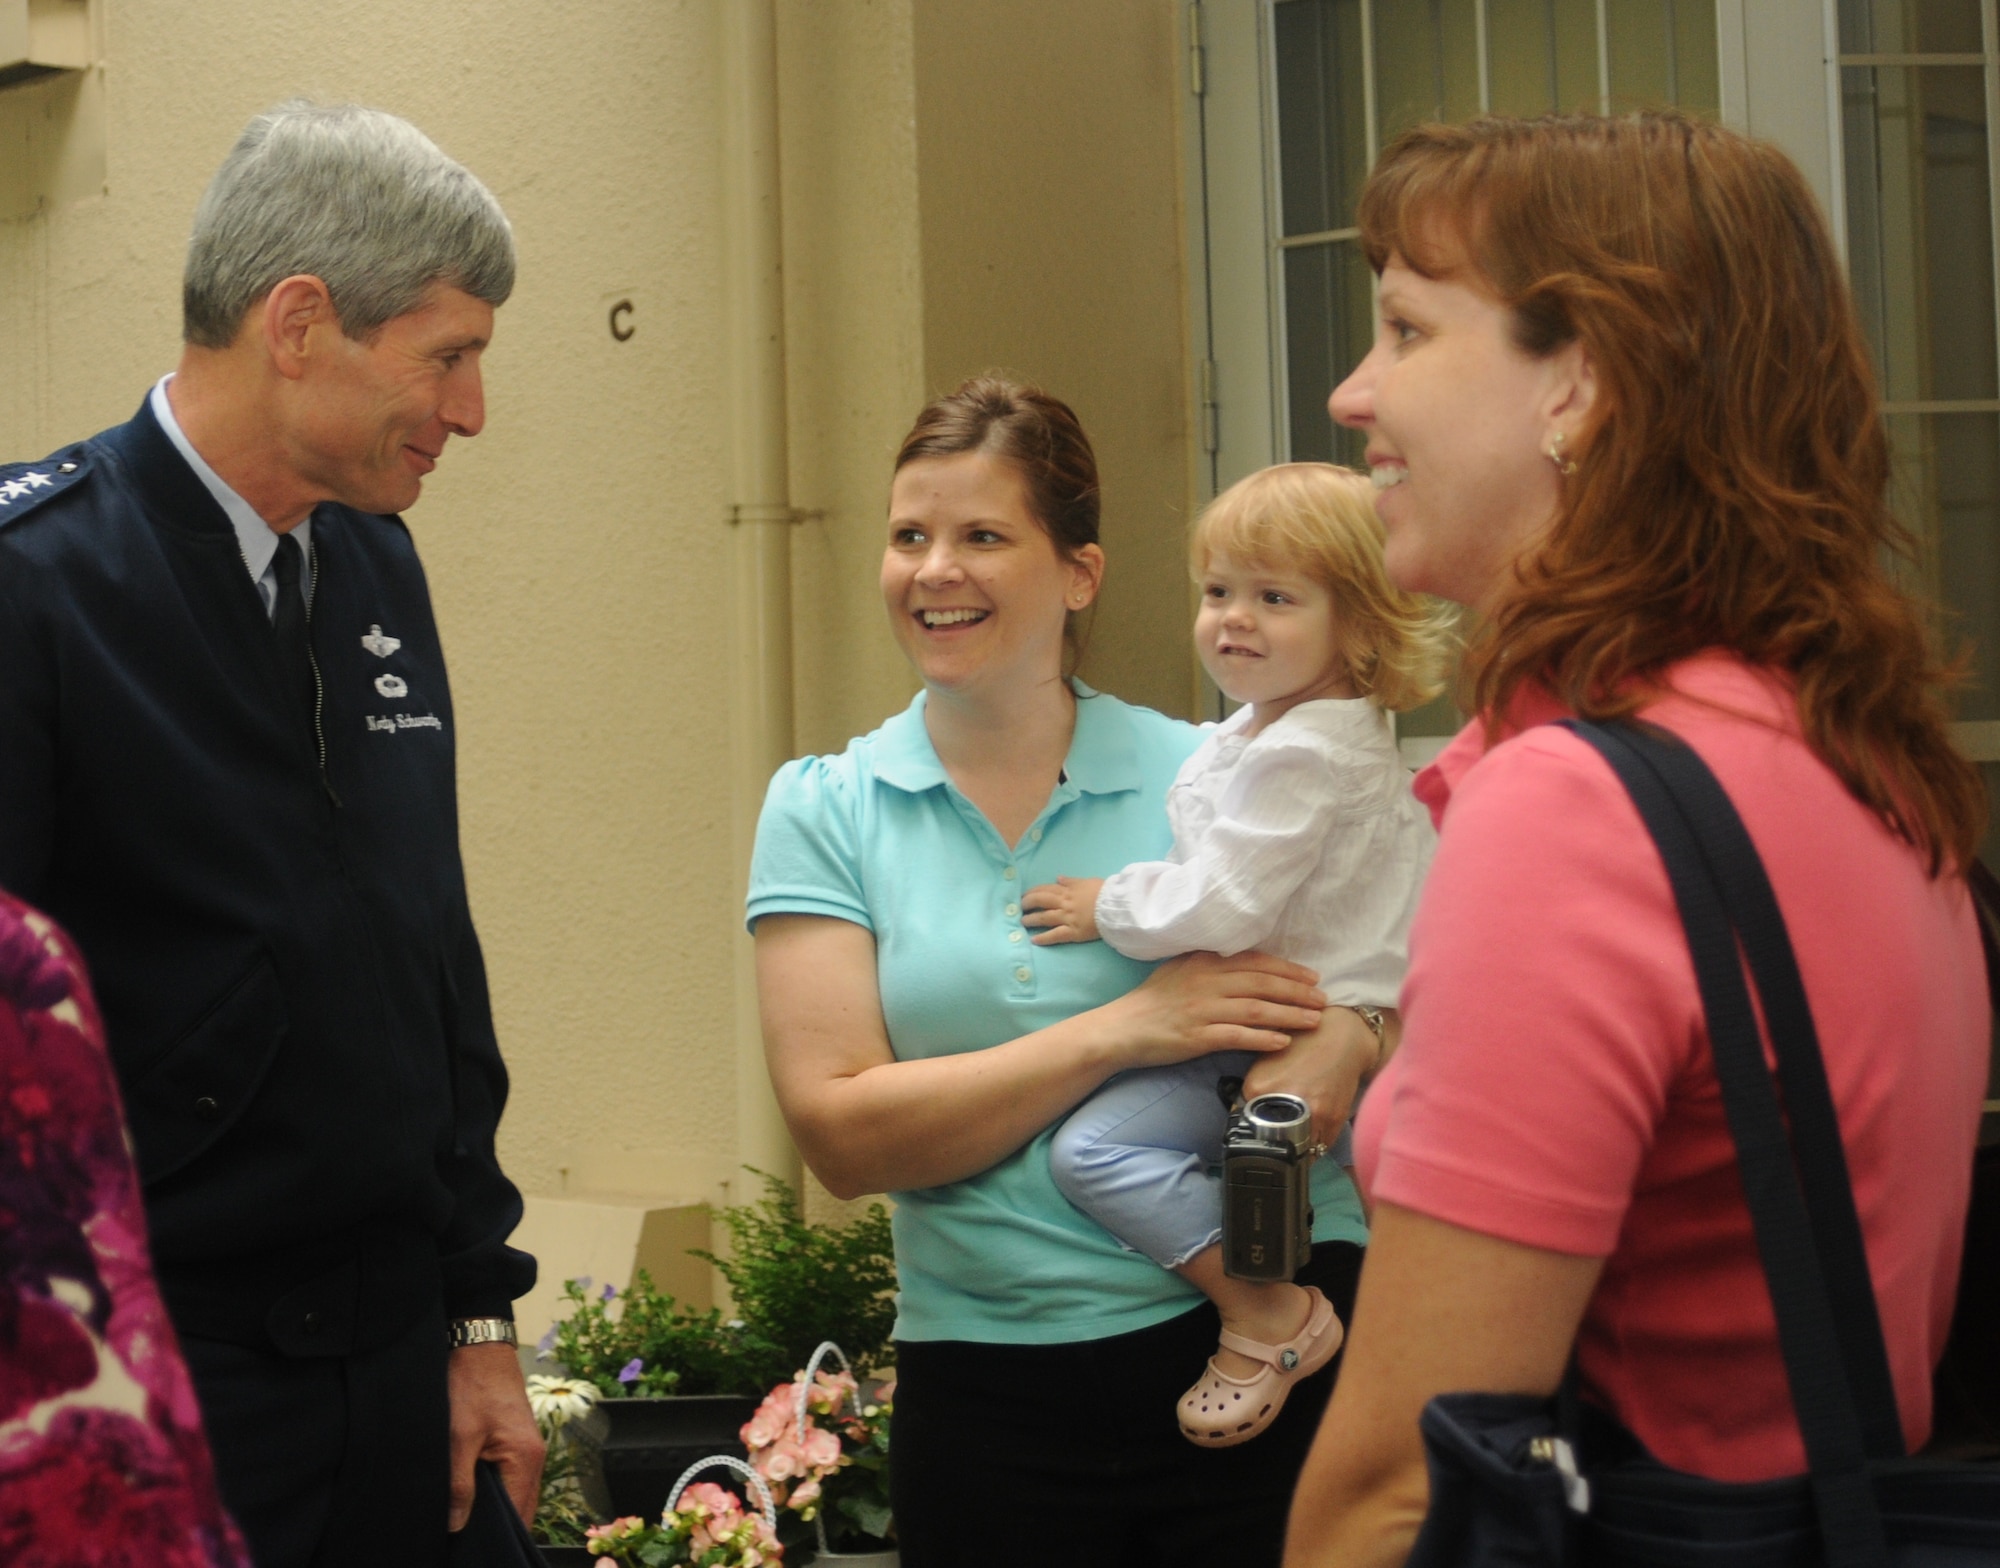 YOKOTA AIR BASE, Japan -- Chief of Staff of the Air Force Gen. Norton Schwartz, visits with Amanda Miner, daughter Sophie, and family friend Jennifer Cox, May 12 during a visit to the base's East Side housing complex.  Base civil engineers gave the general a tour of a renovated garden house and the East Side Steam Plant during his first visit here since he became chief of staff Aug. 12, 2008. (U.S. Air Force photo/Airman Sean Martin)